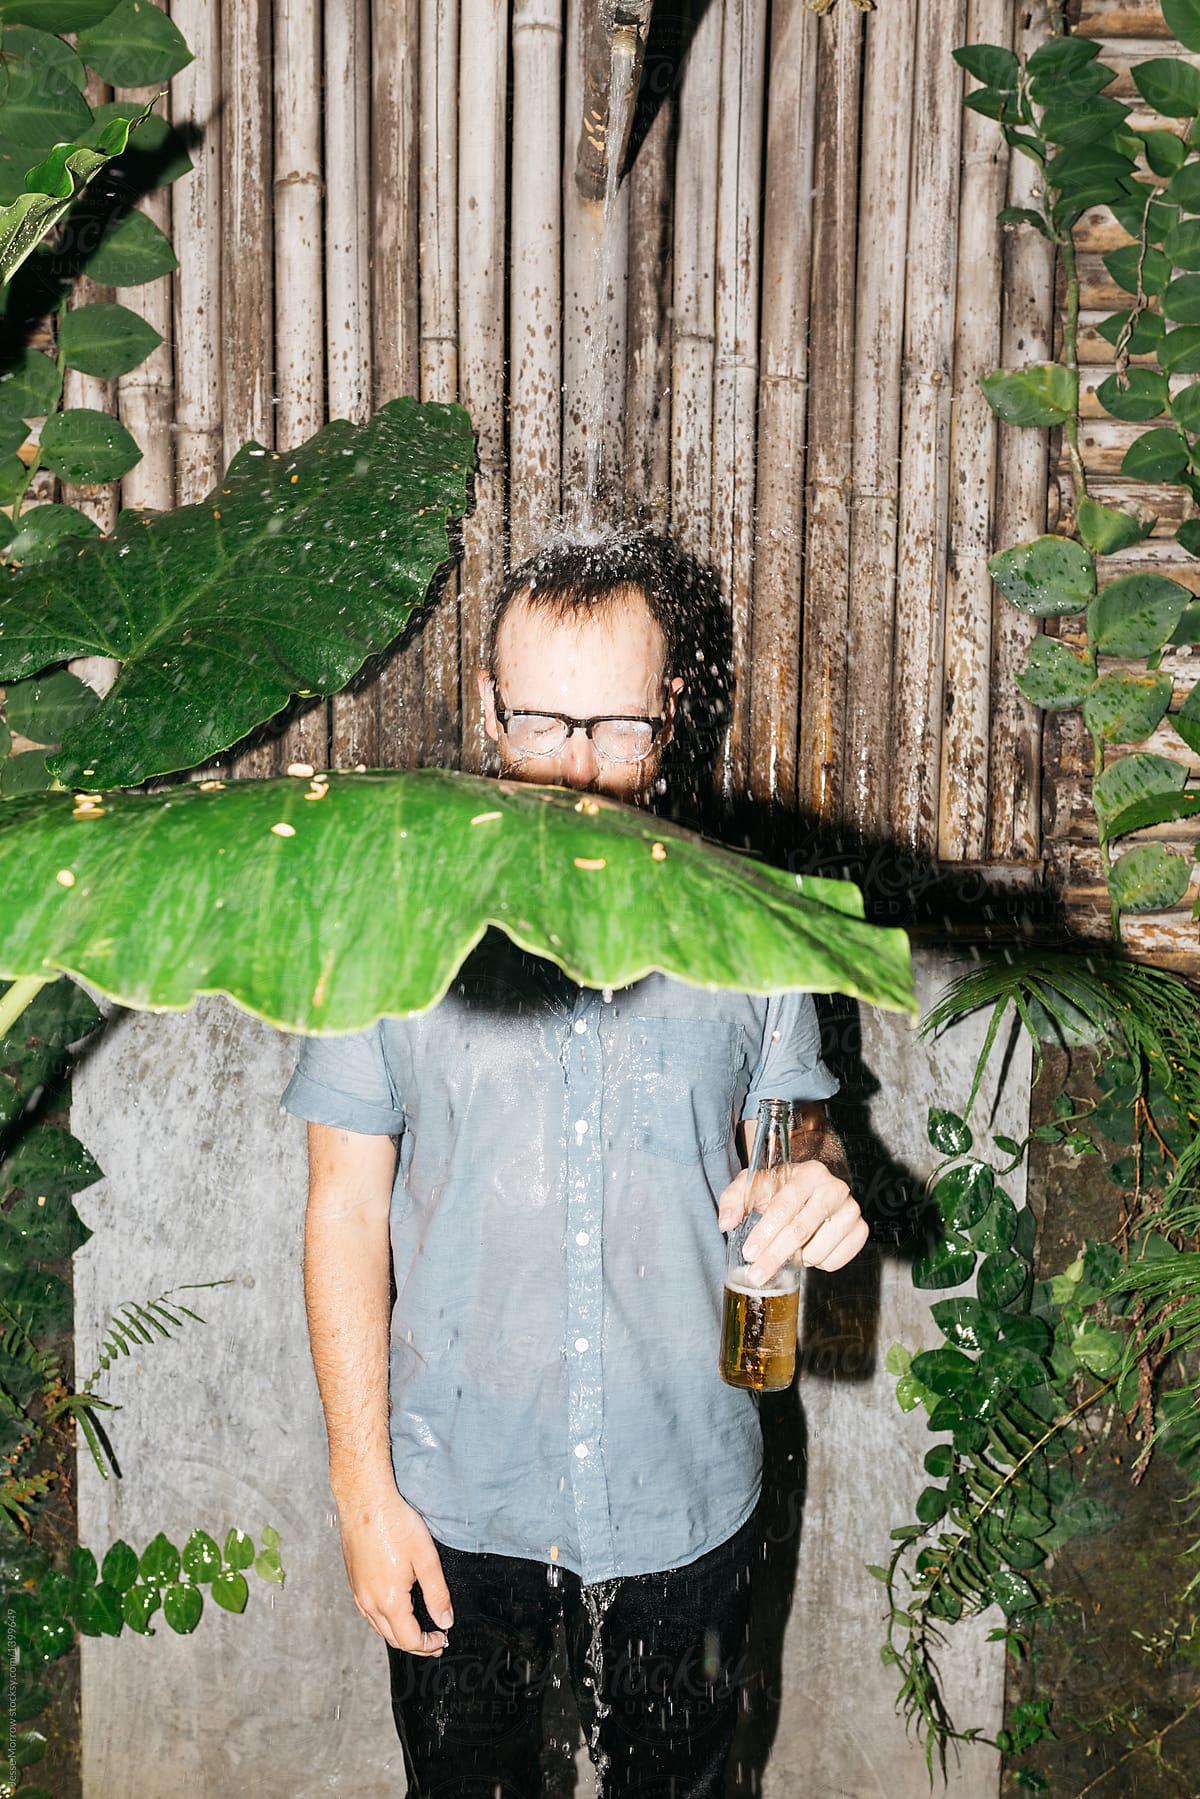 Young man drinks beer fully clothed in outdoor wild shower with large plants